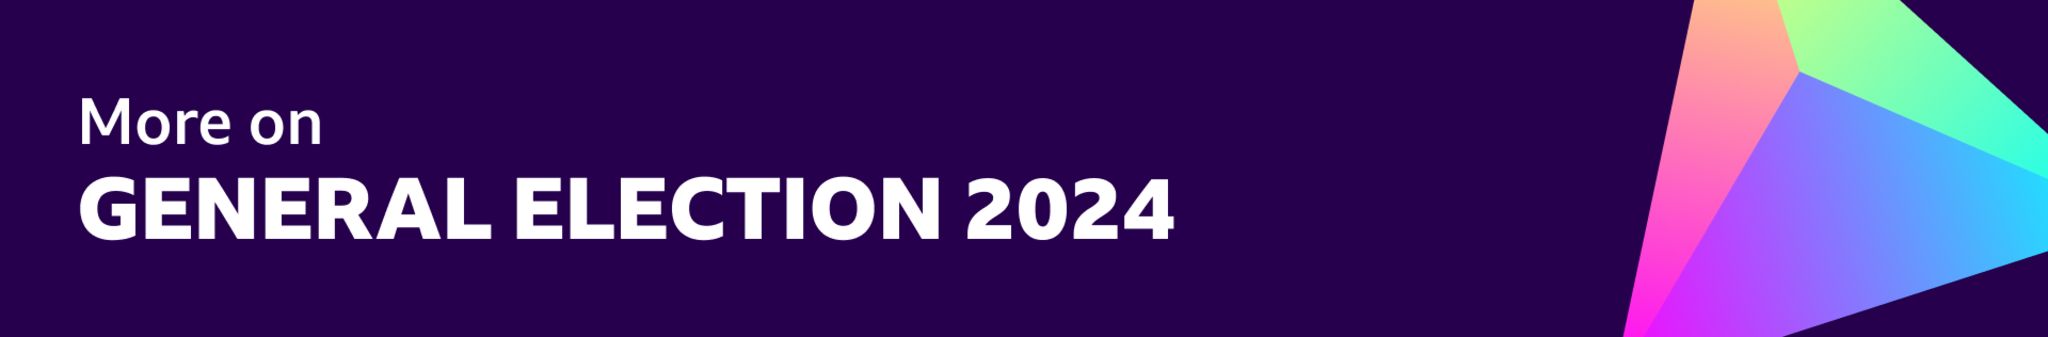 Banner reading: "More on general election 2024"